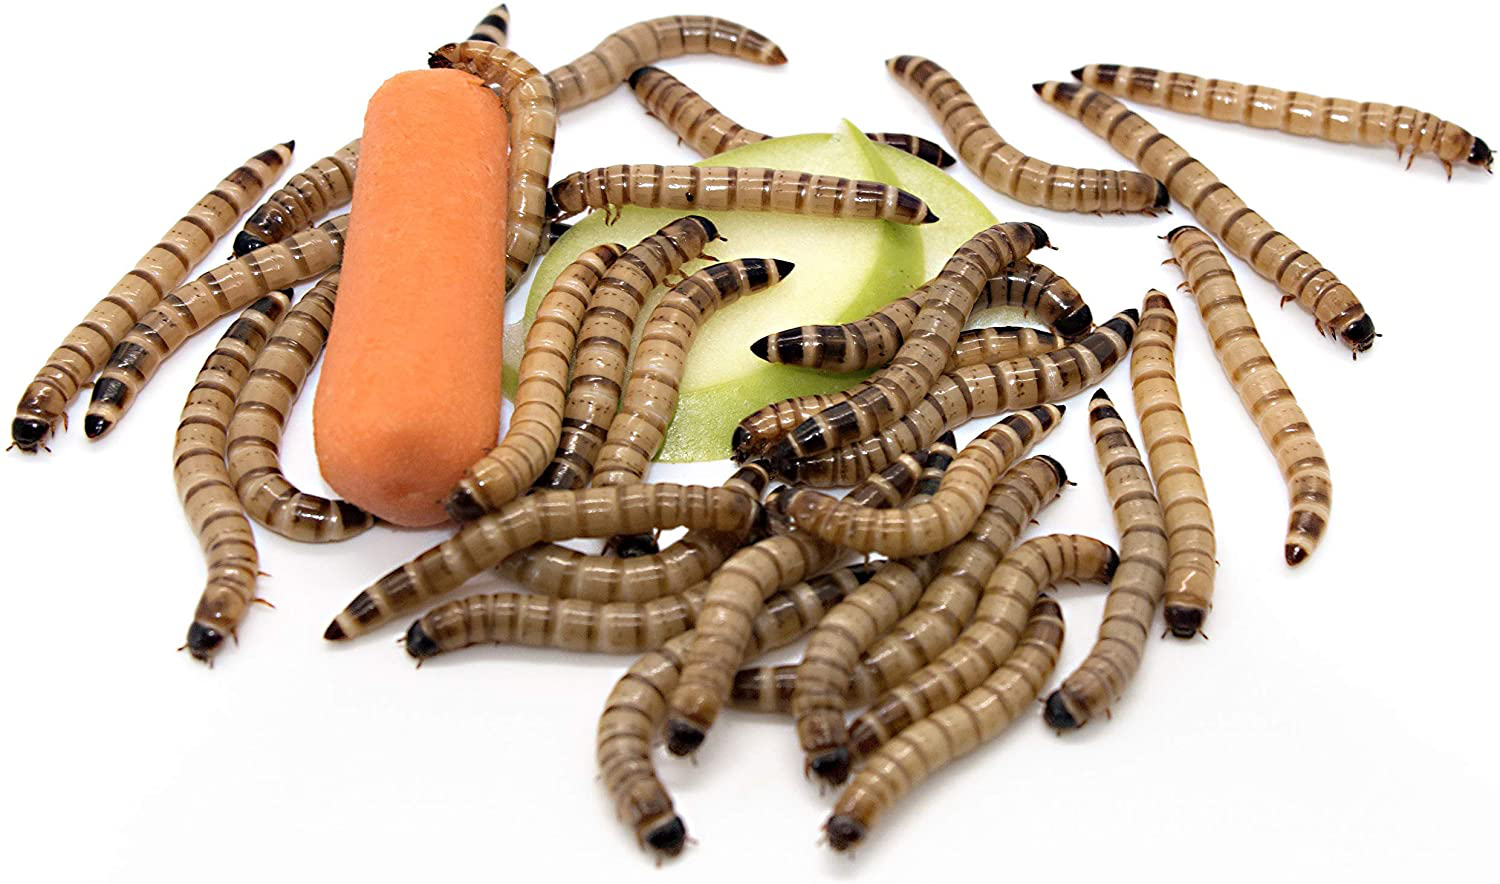 Freshinsects Live Superworms Organically Grown, Feed Reptile, Birds, Fishing Best Bait (100-500 Count) Animals & Pet Supplies > Pet Supplies > Reptile & Amphibian Supplies > Reptile & Amphibian Substrates Freshinsects 250 Count Large 